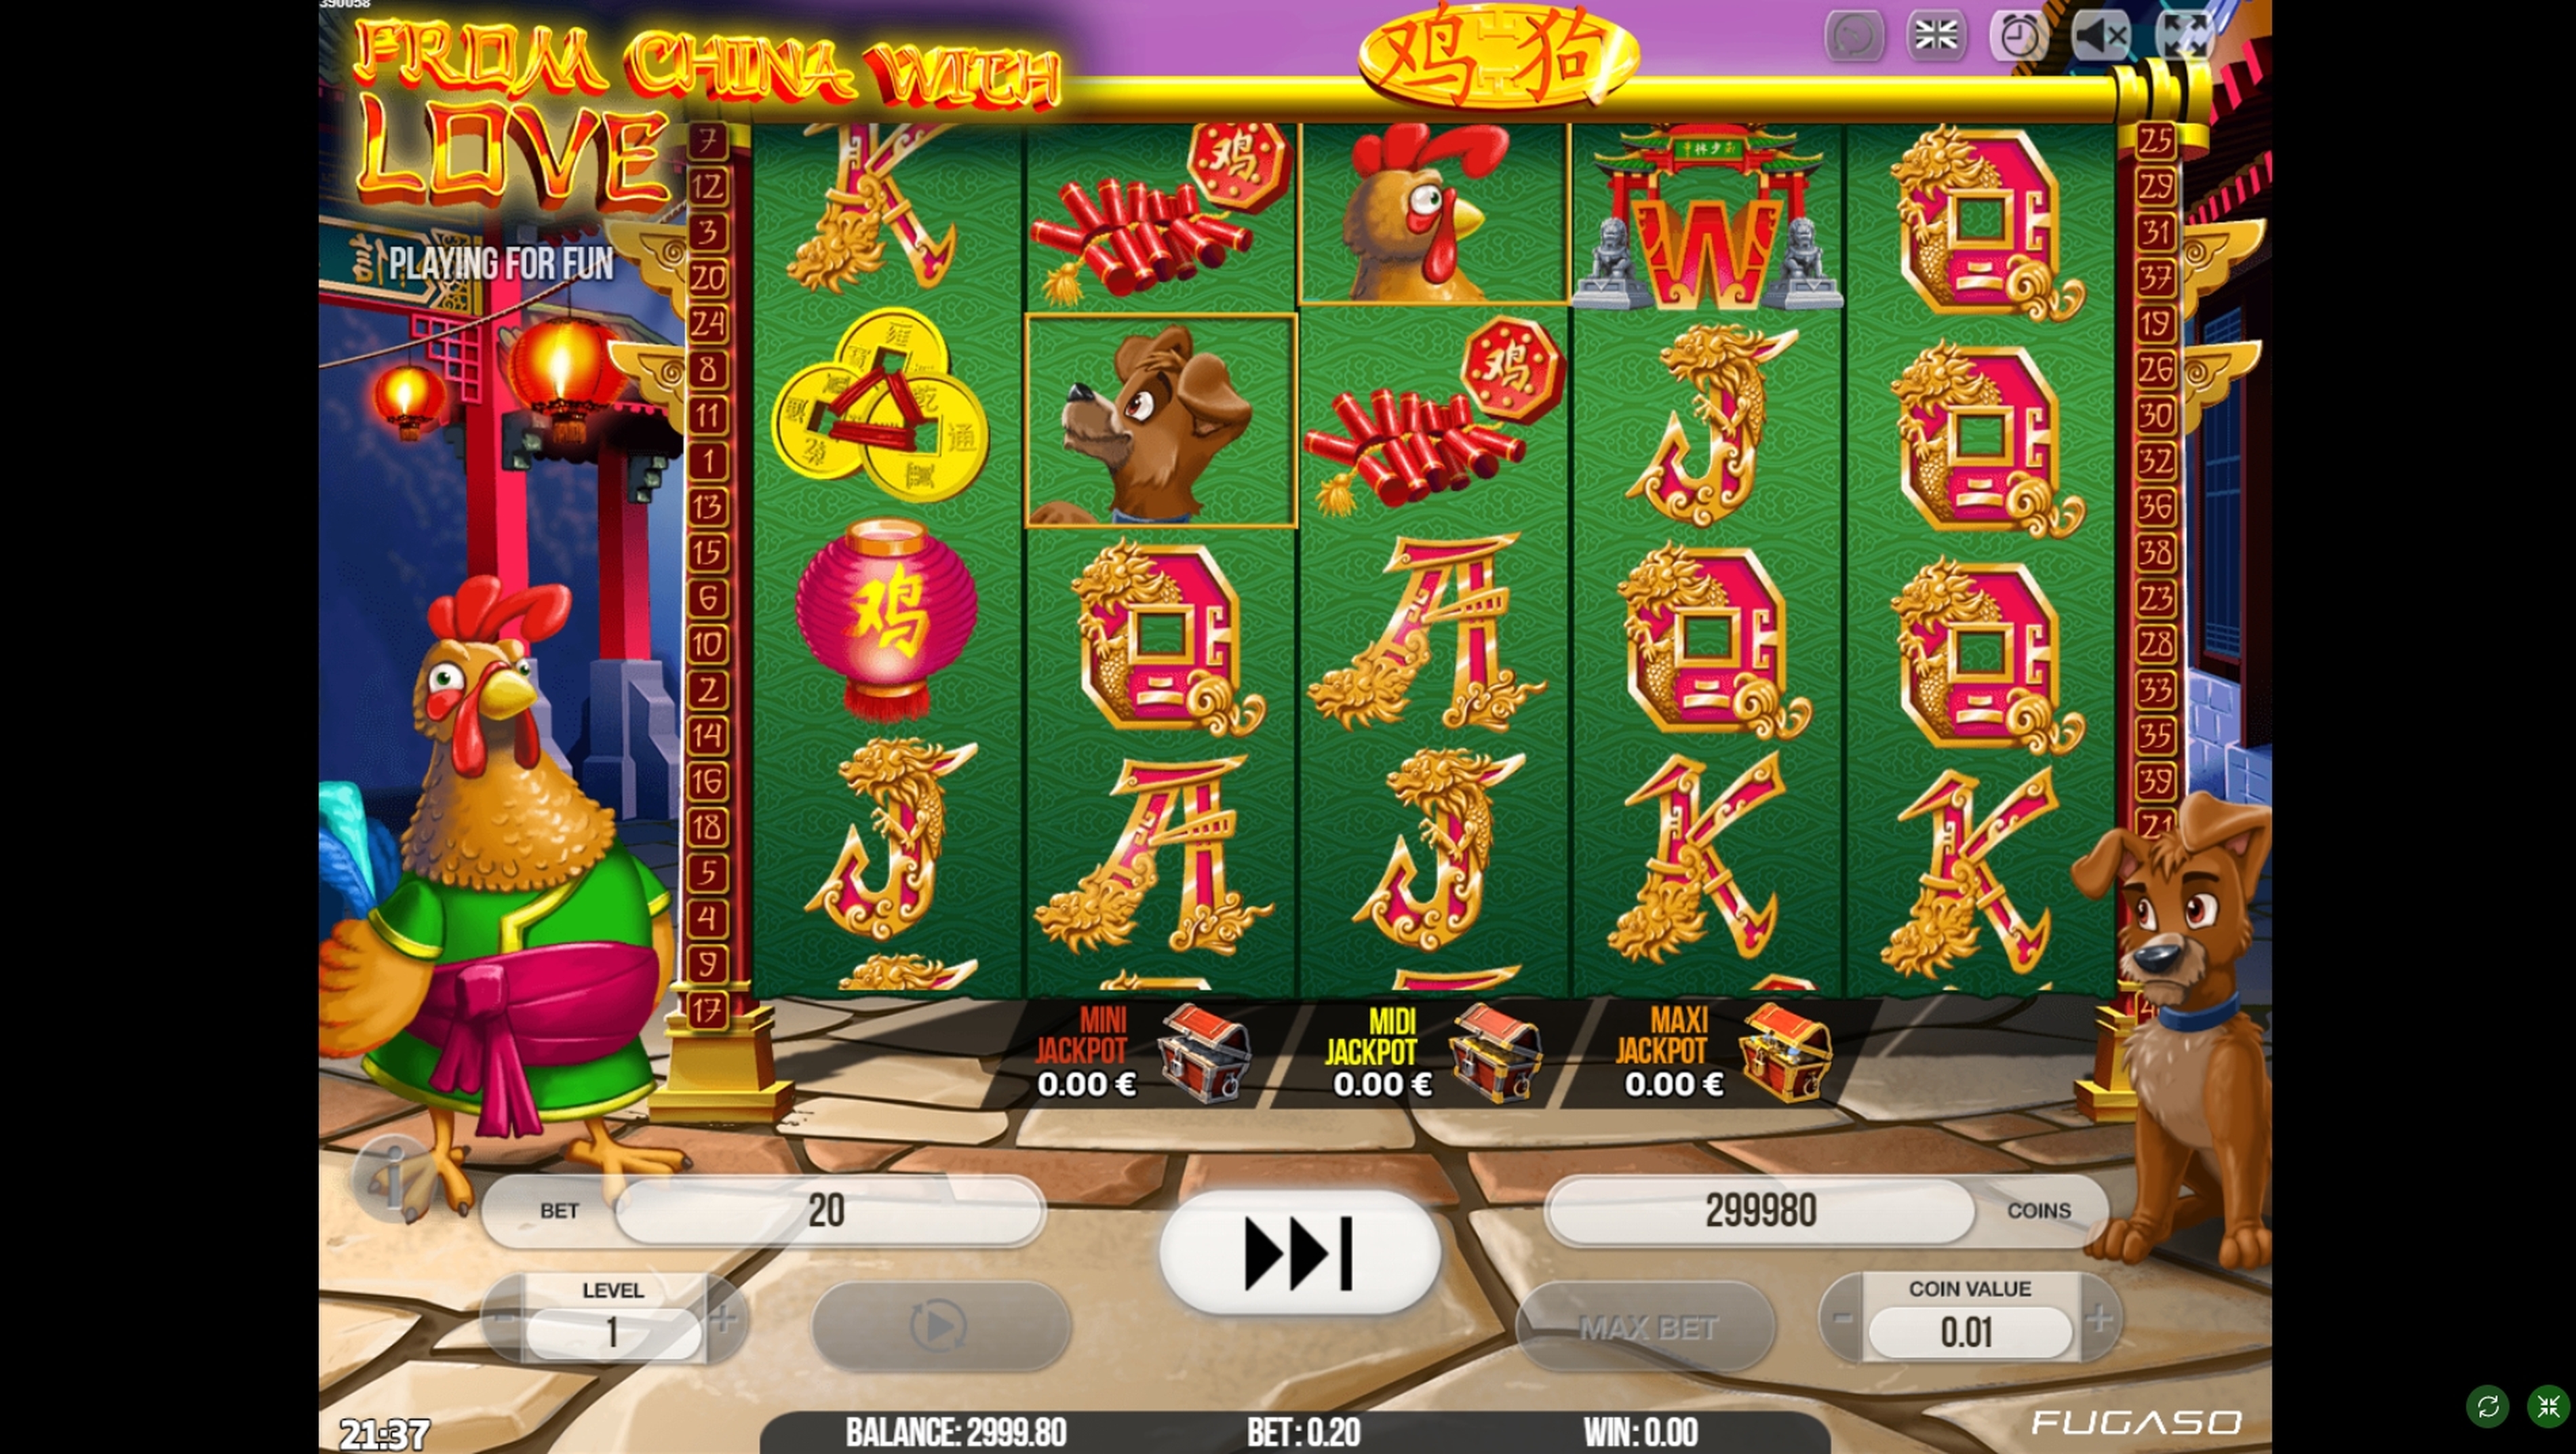 Reels in From China With Love Slot Game by Fugaso